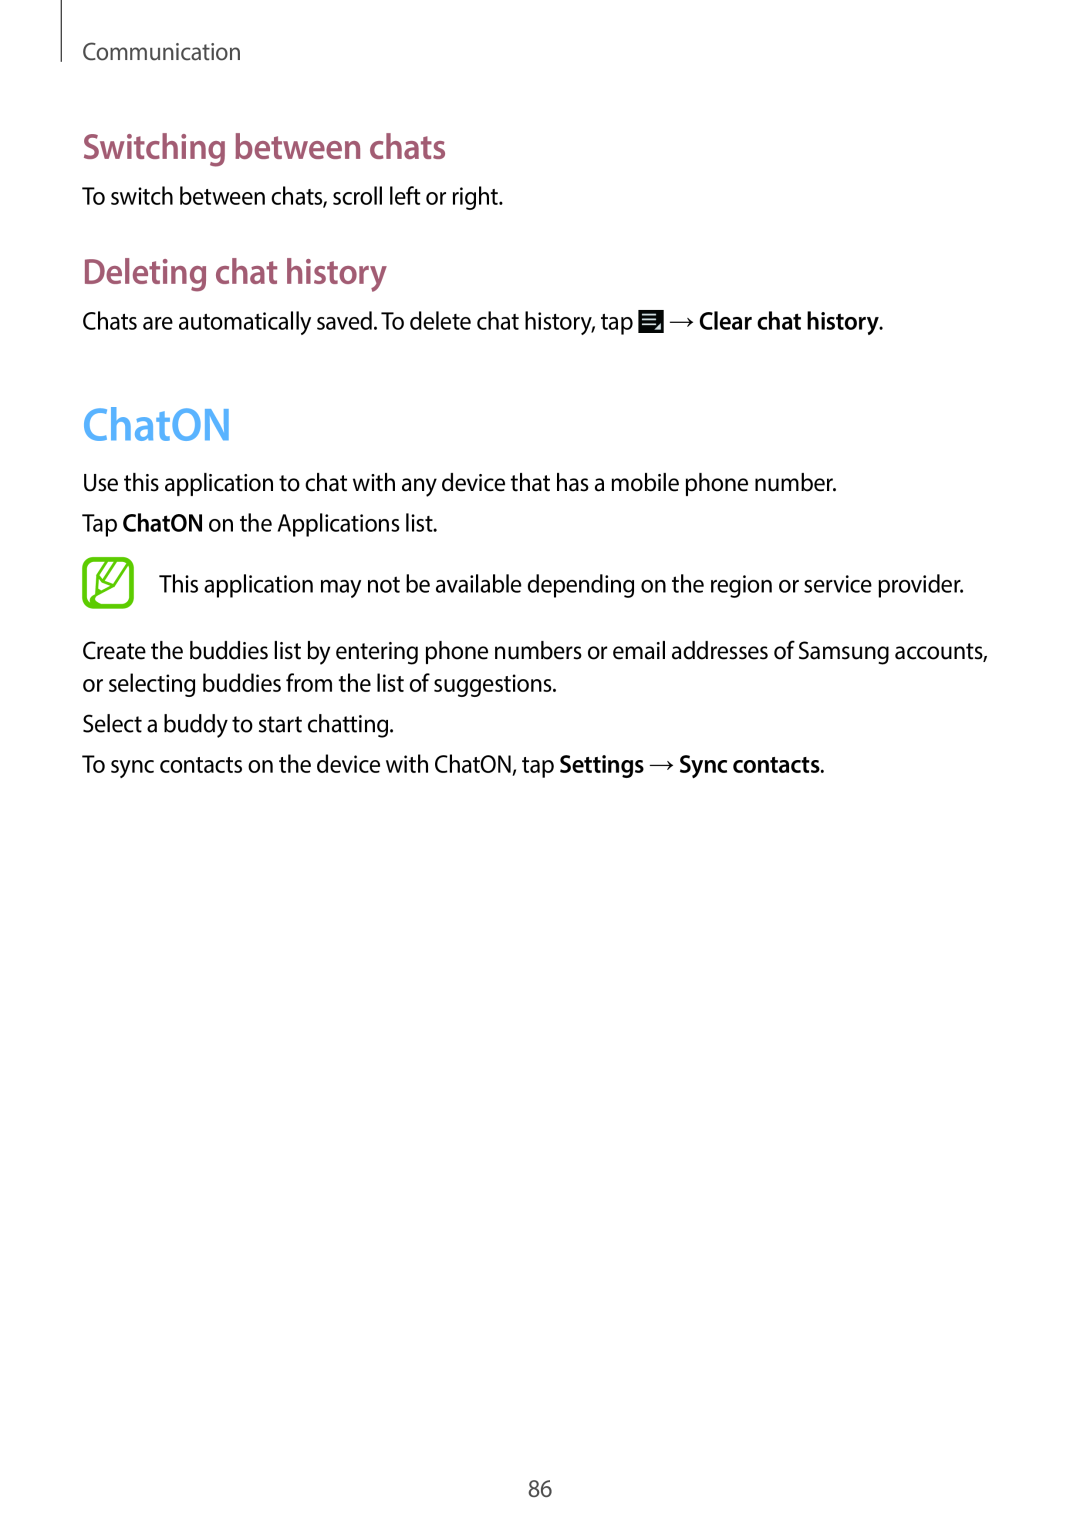 Samsung EK-GC100 user manual ChatON, Switching between chats, Deleting chat history, Communication 